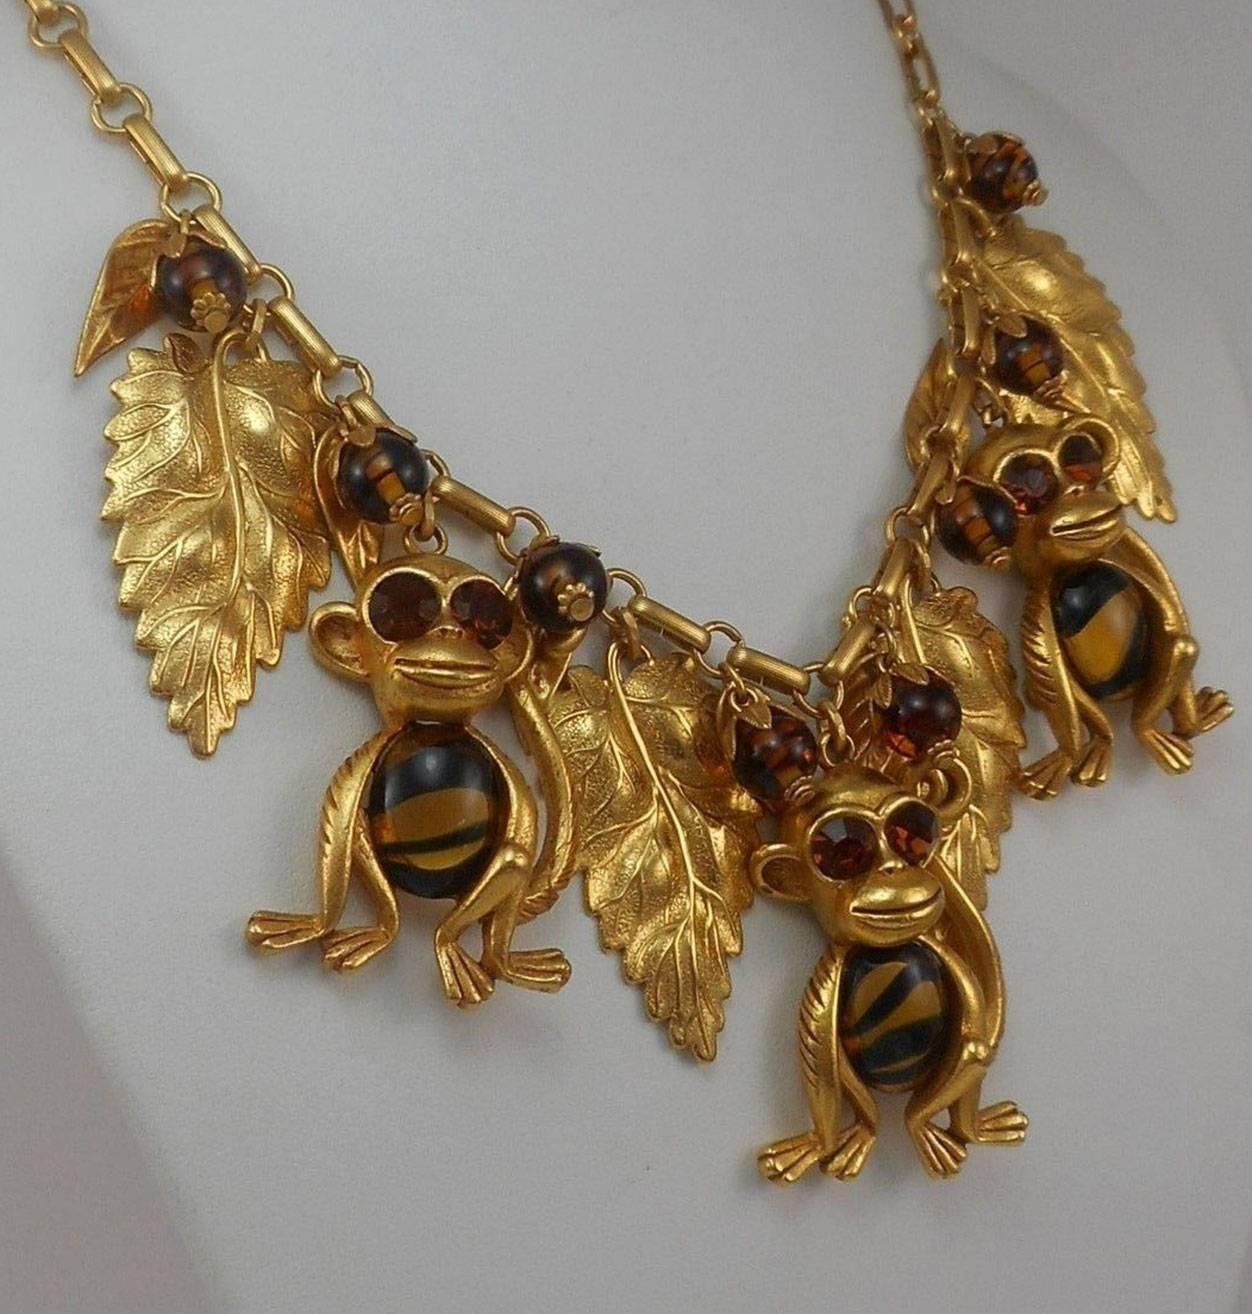 Contemporary Askew London Monkey and Leaf Signed Statement Necklace